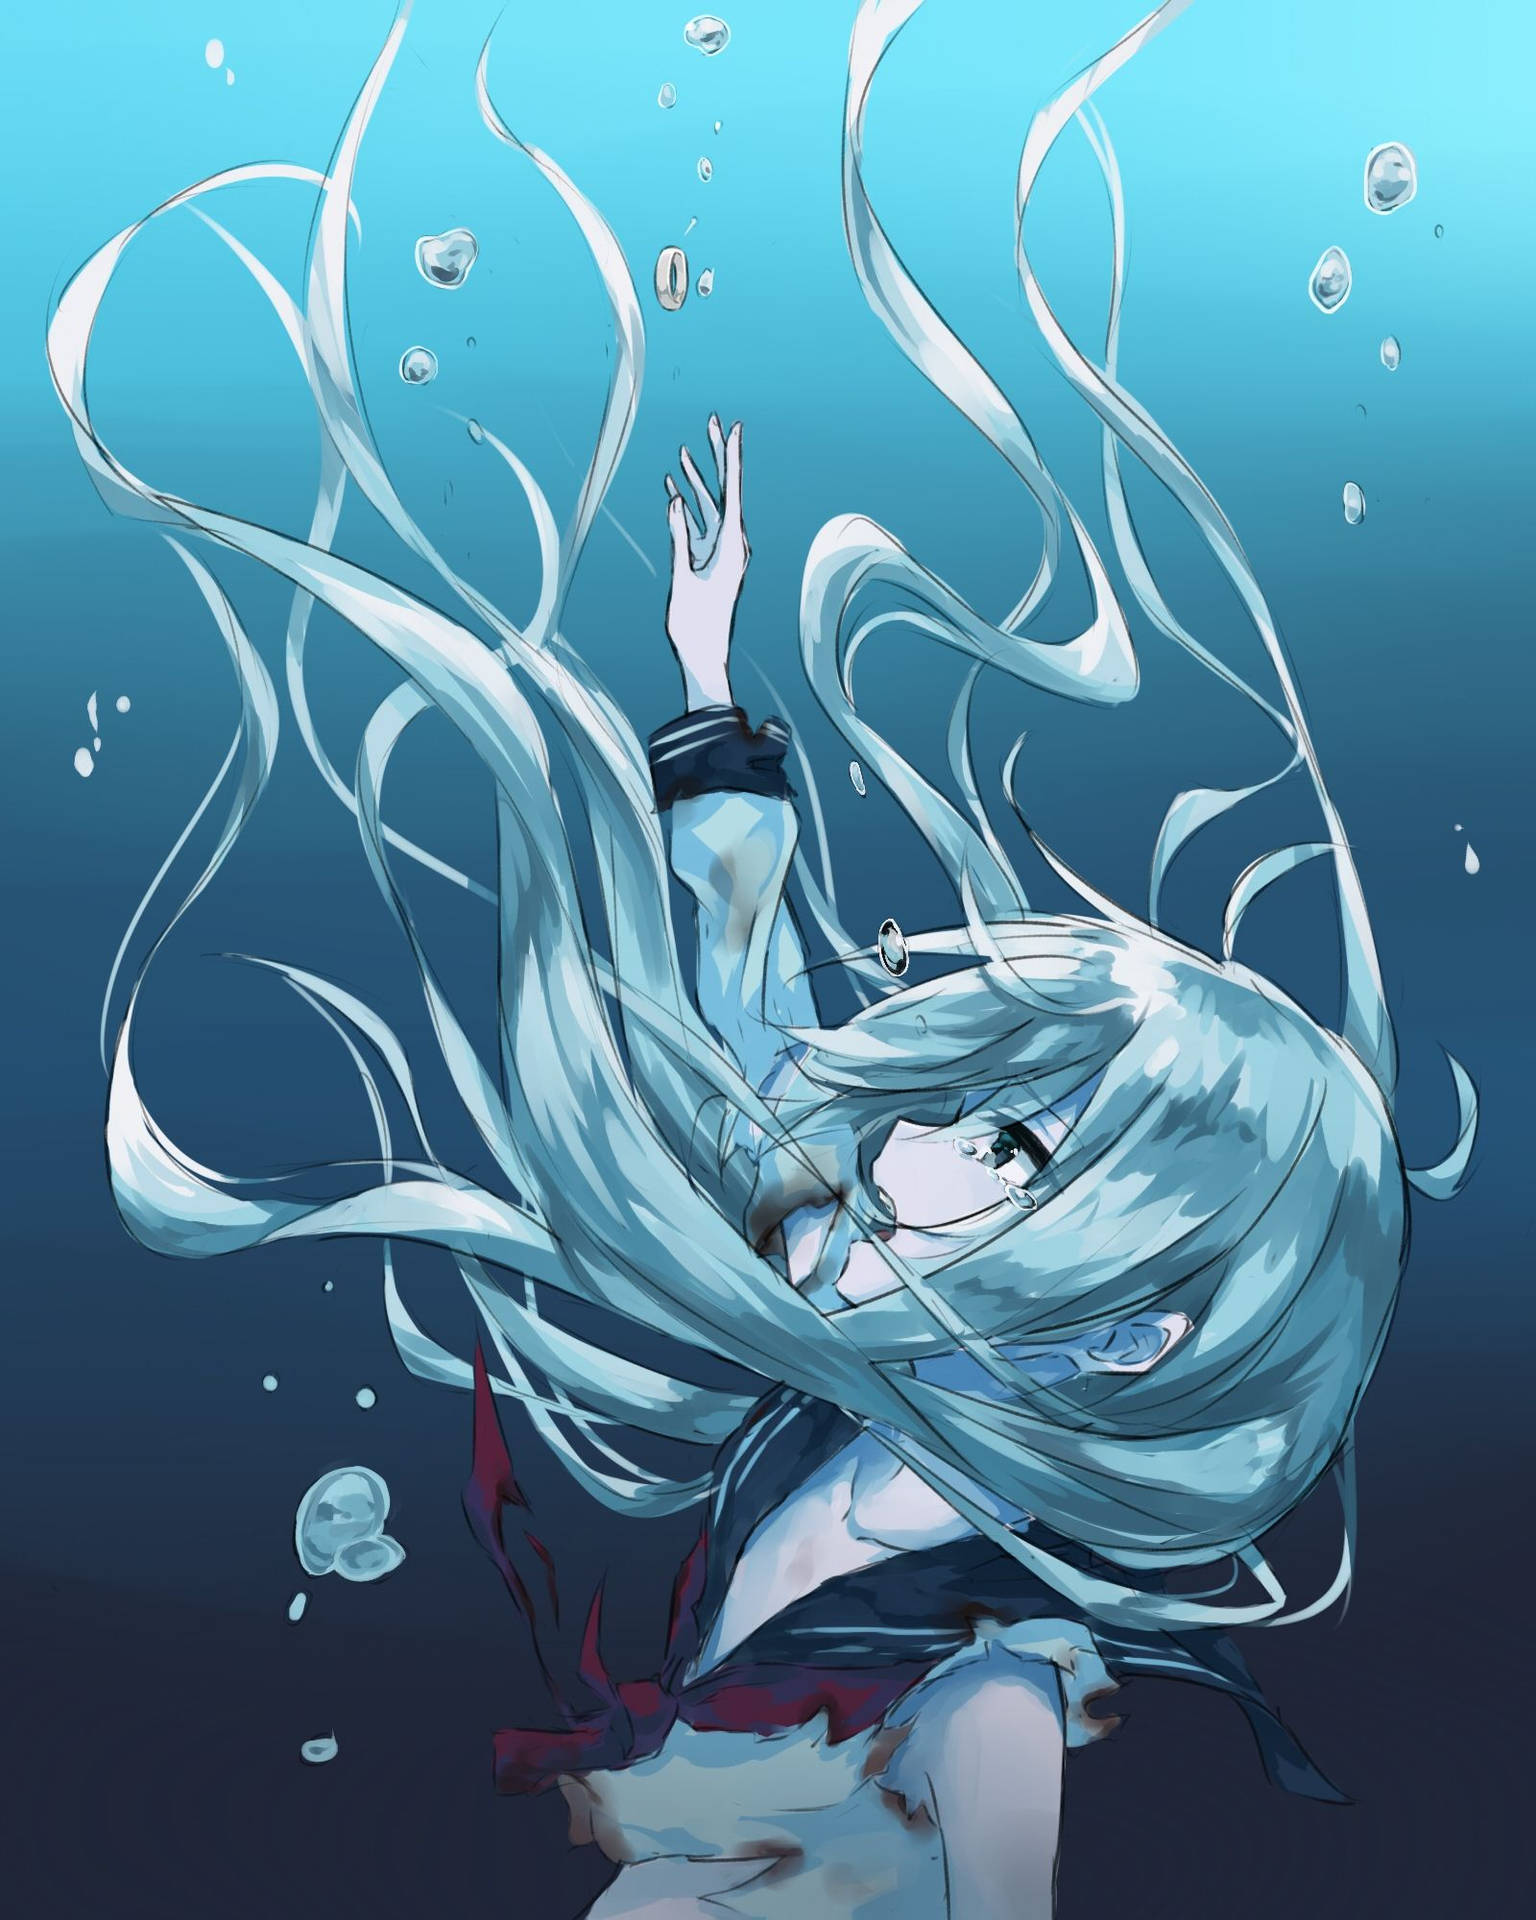 Download Anime Girl Sad Alone Drowning In Water Wallpaper 